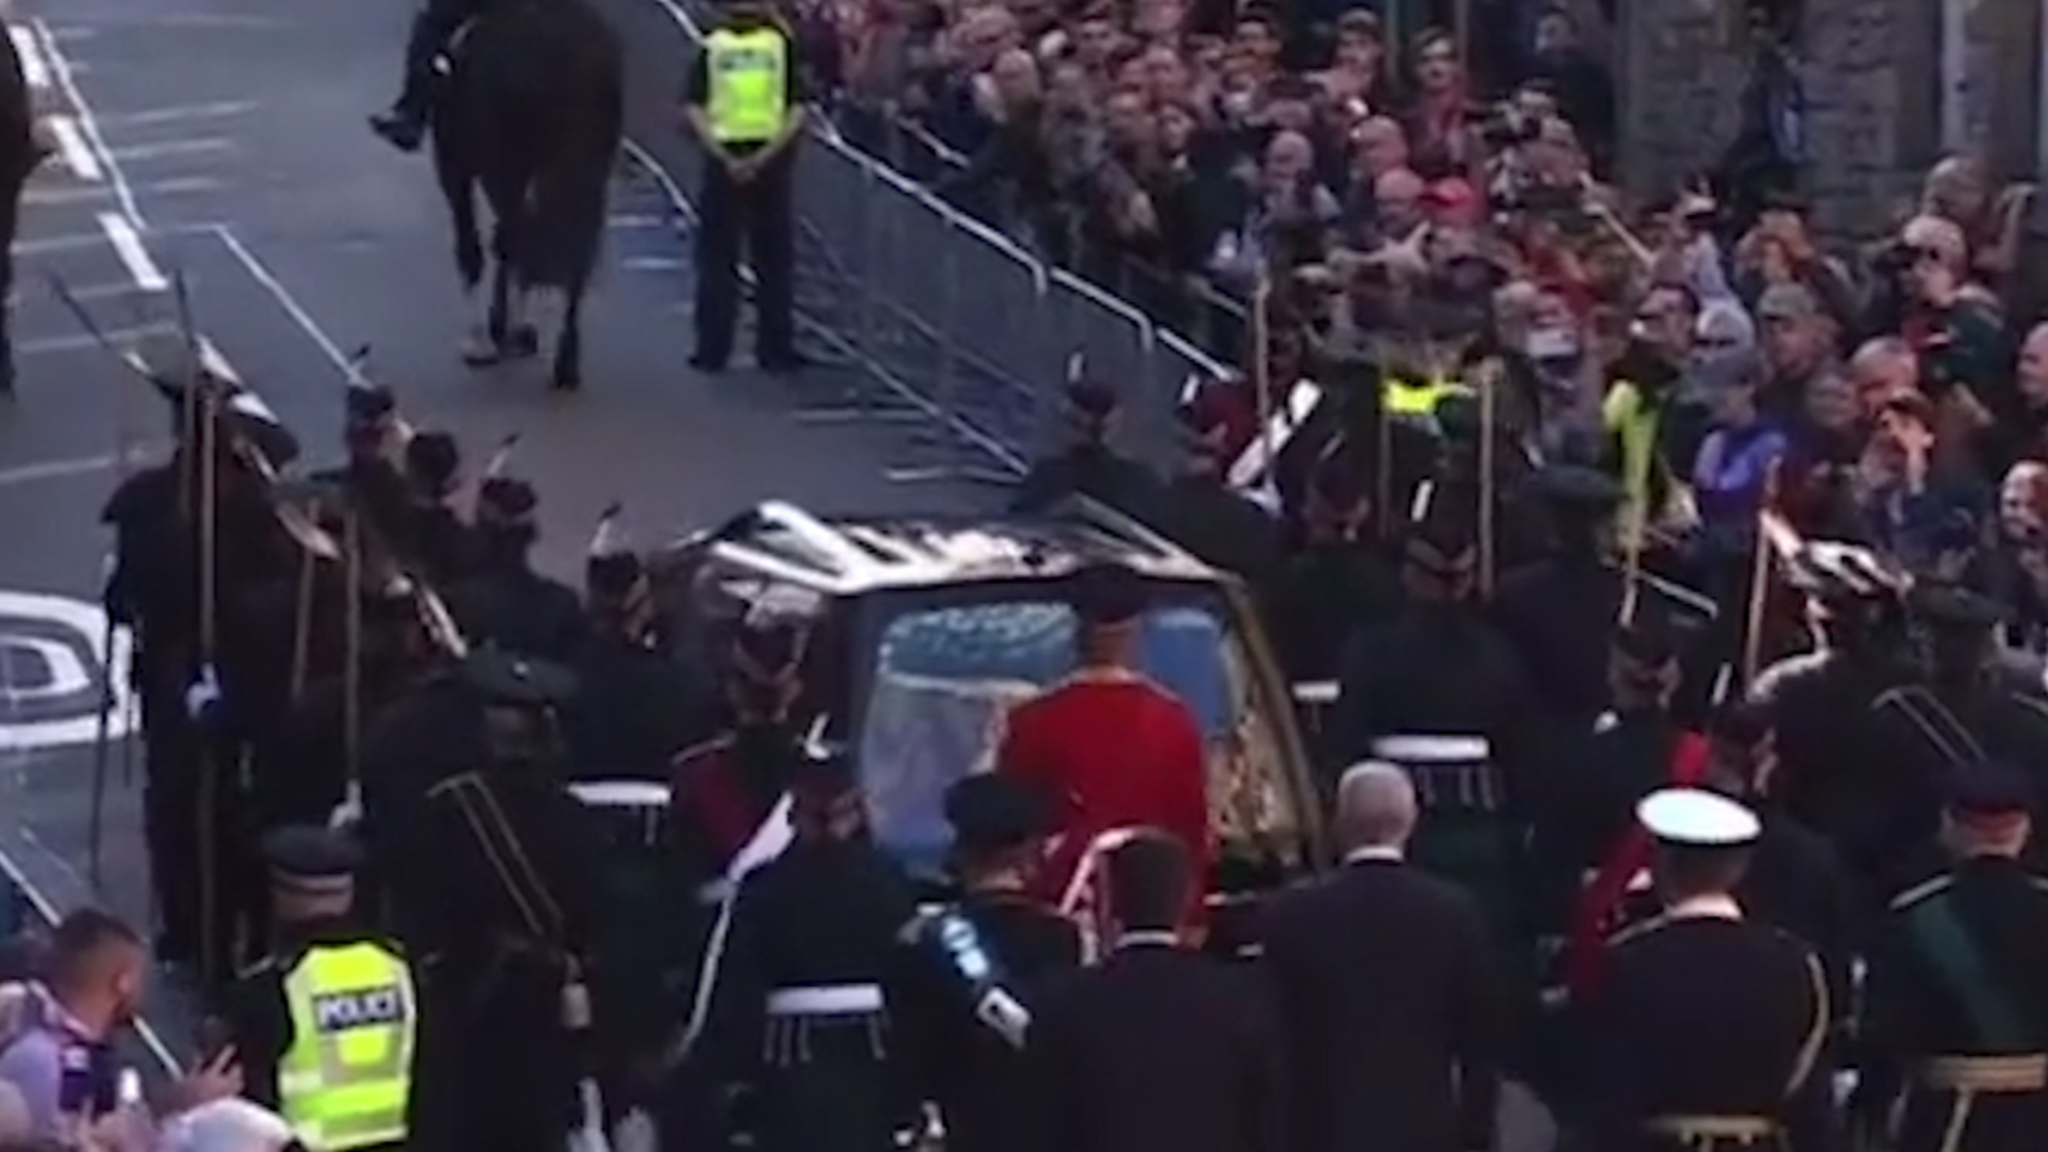 Man Arrested For Heckling Prince Andrew at Queen Elizabeth’s Funeral Procession